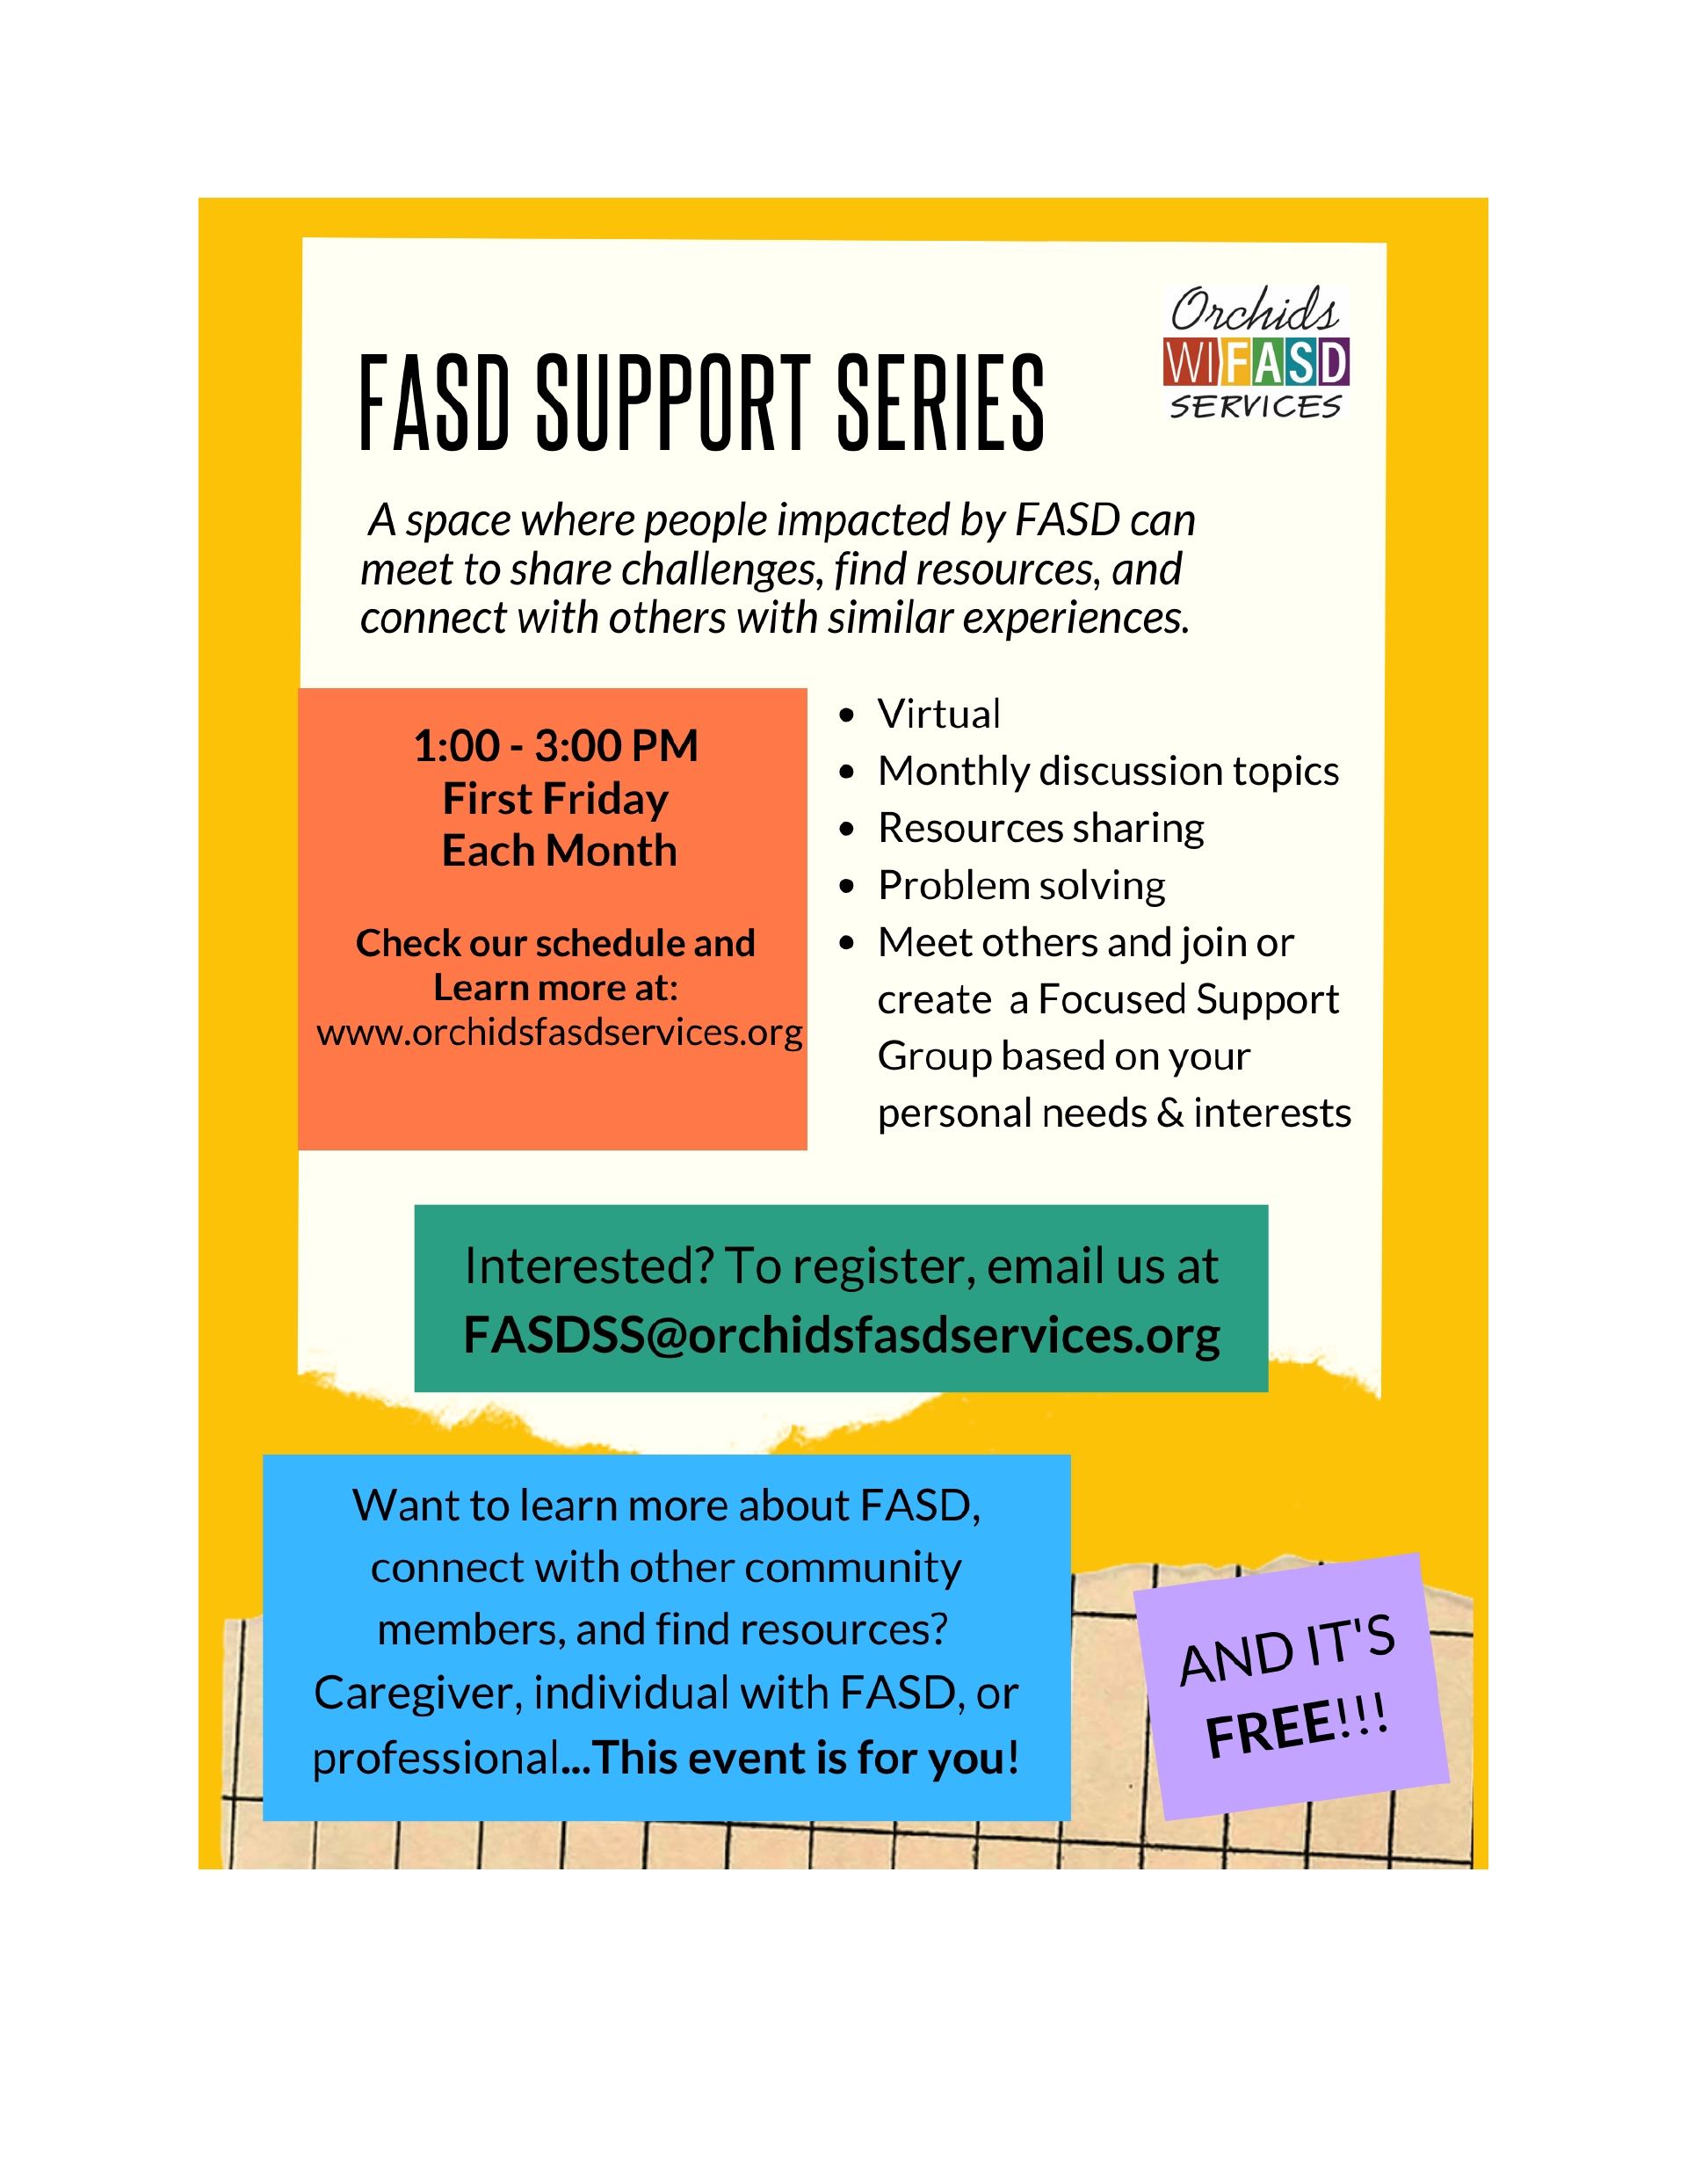 FASD Support Series for those Impacted by Fetal Alcohol Spectrum Disorder! First Friday online!